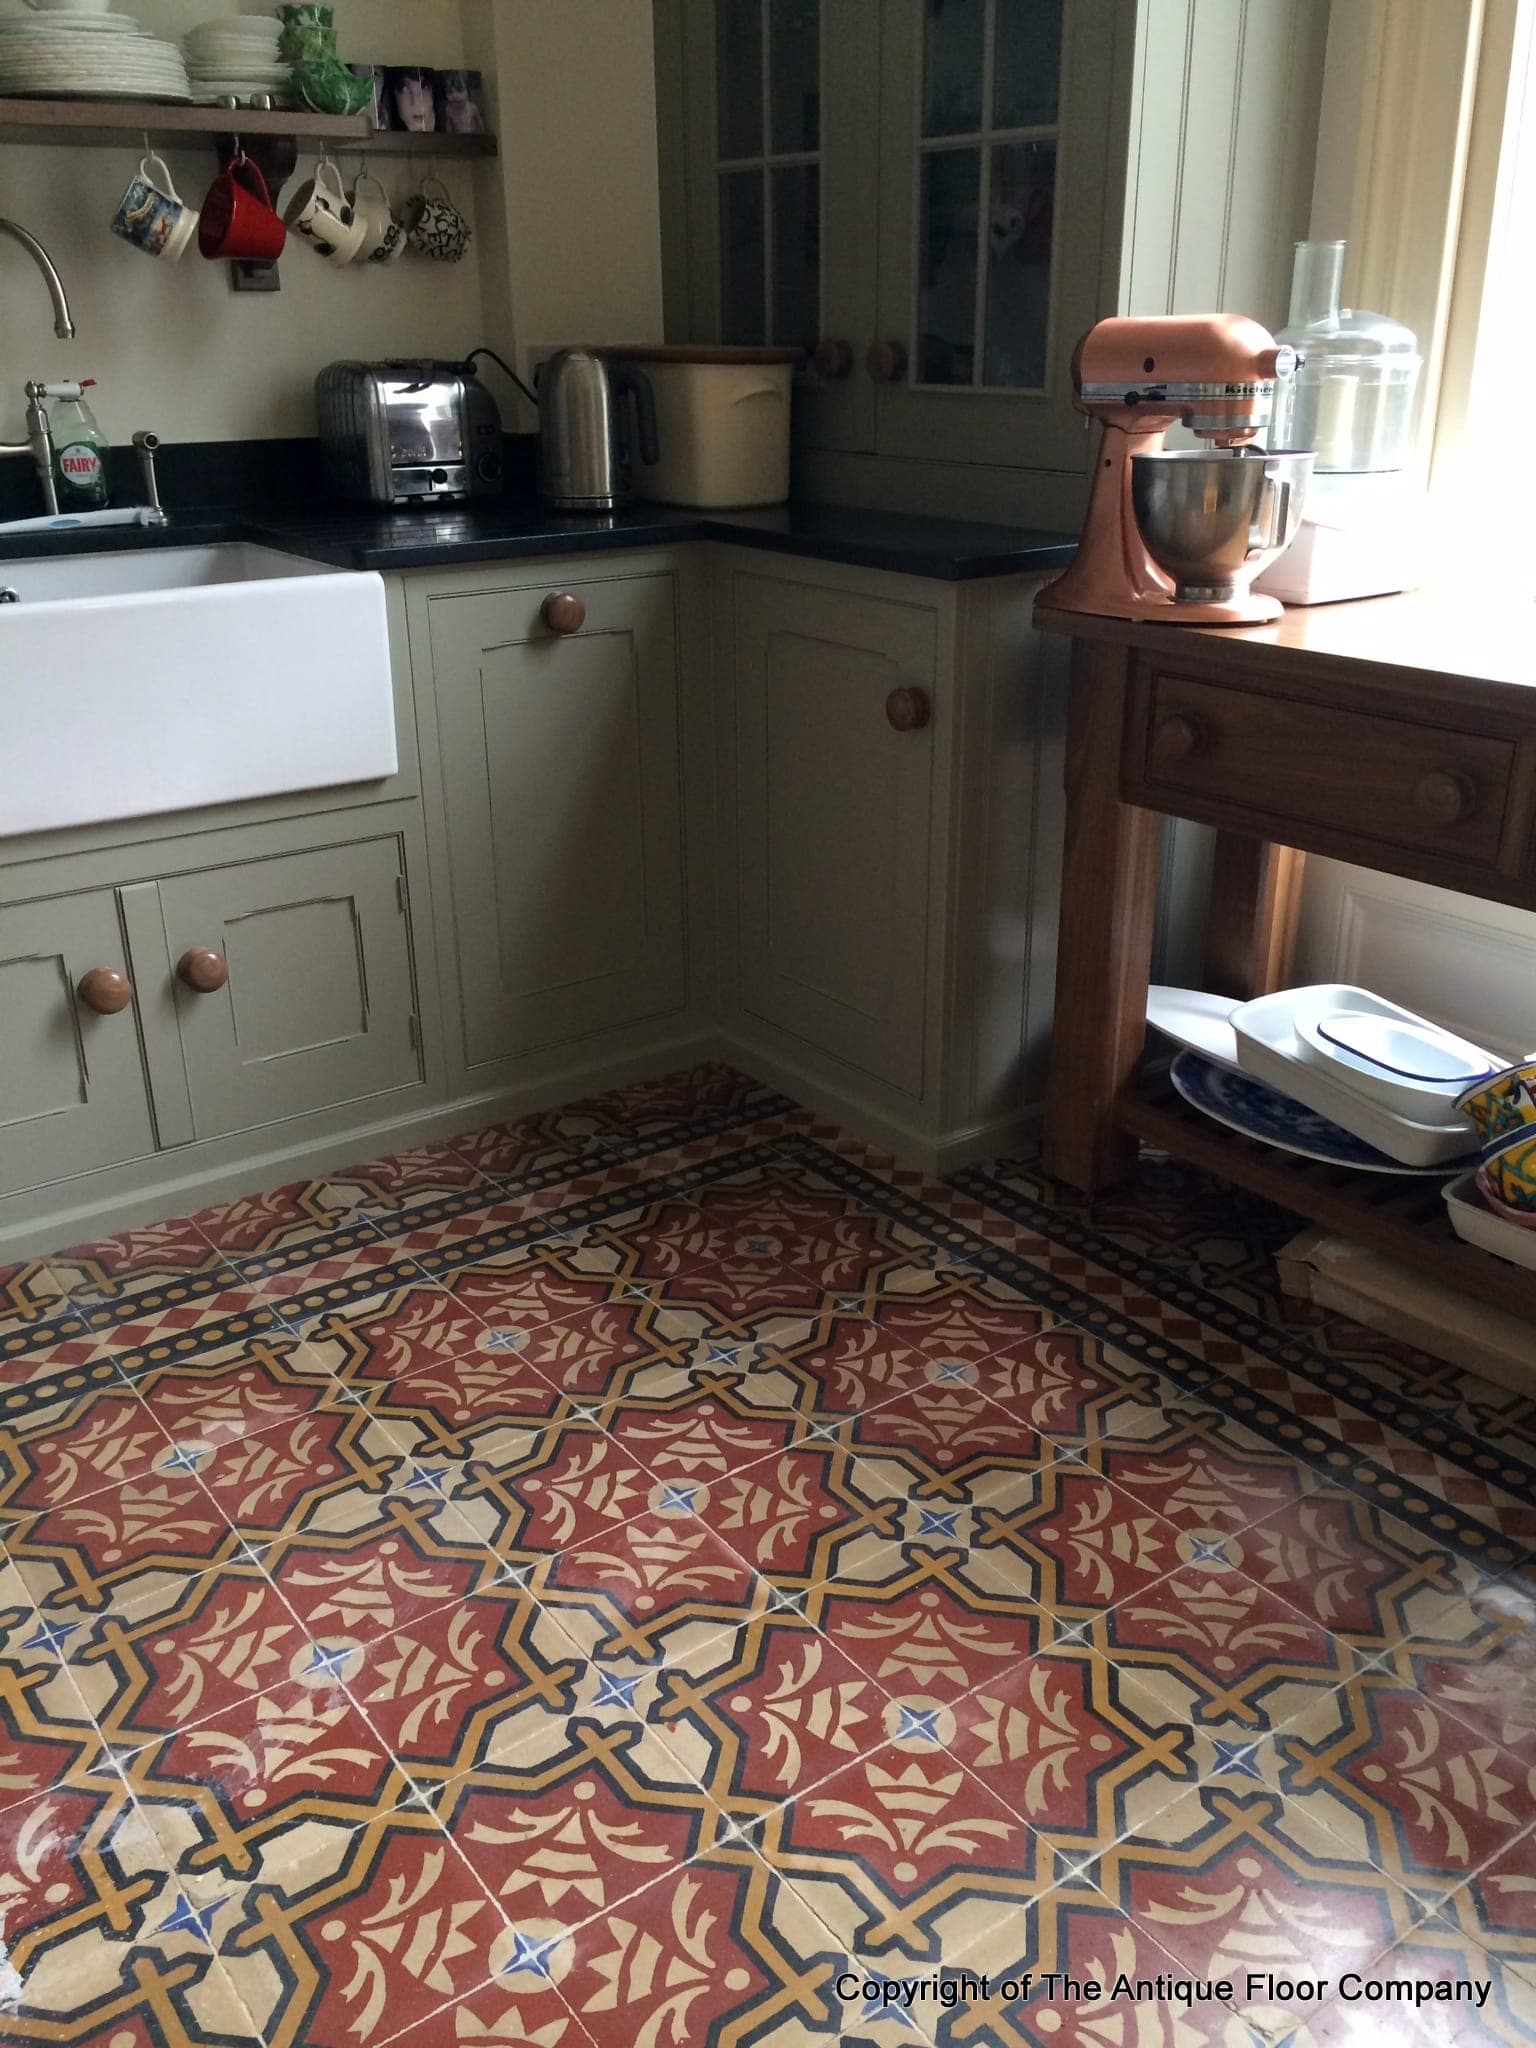 Two antique carreaux de ciment floors adding warmth and colour in this ...